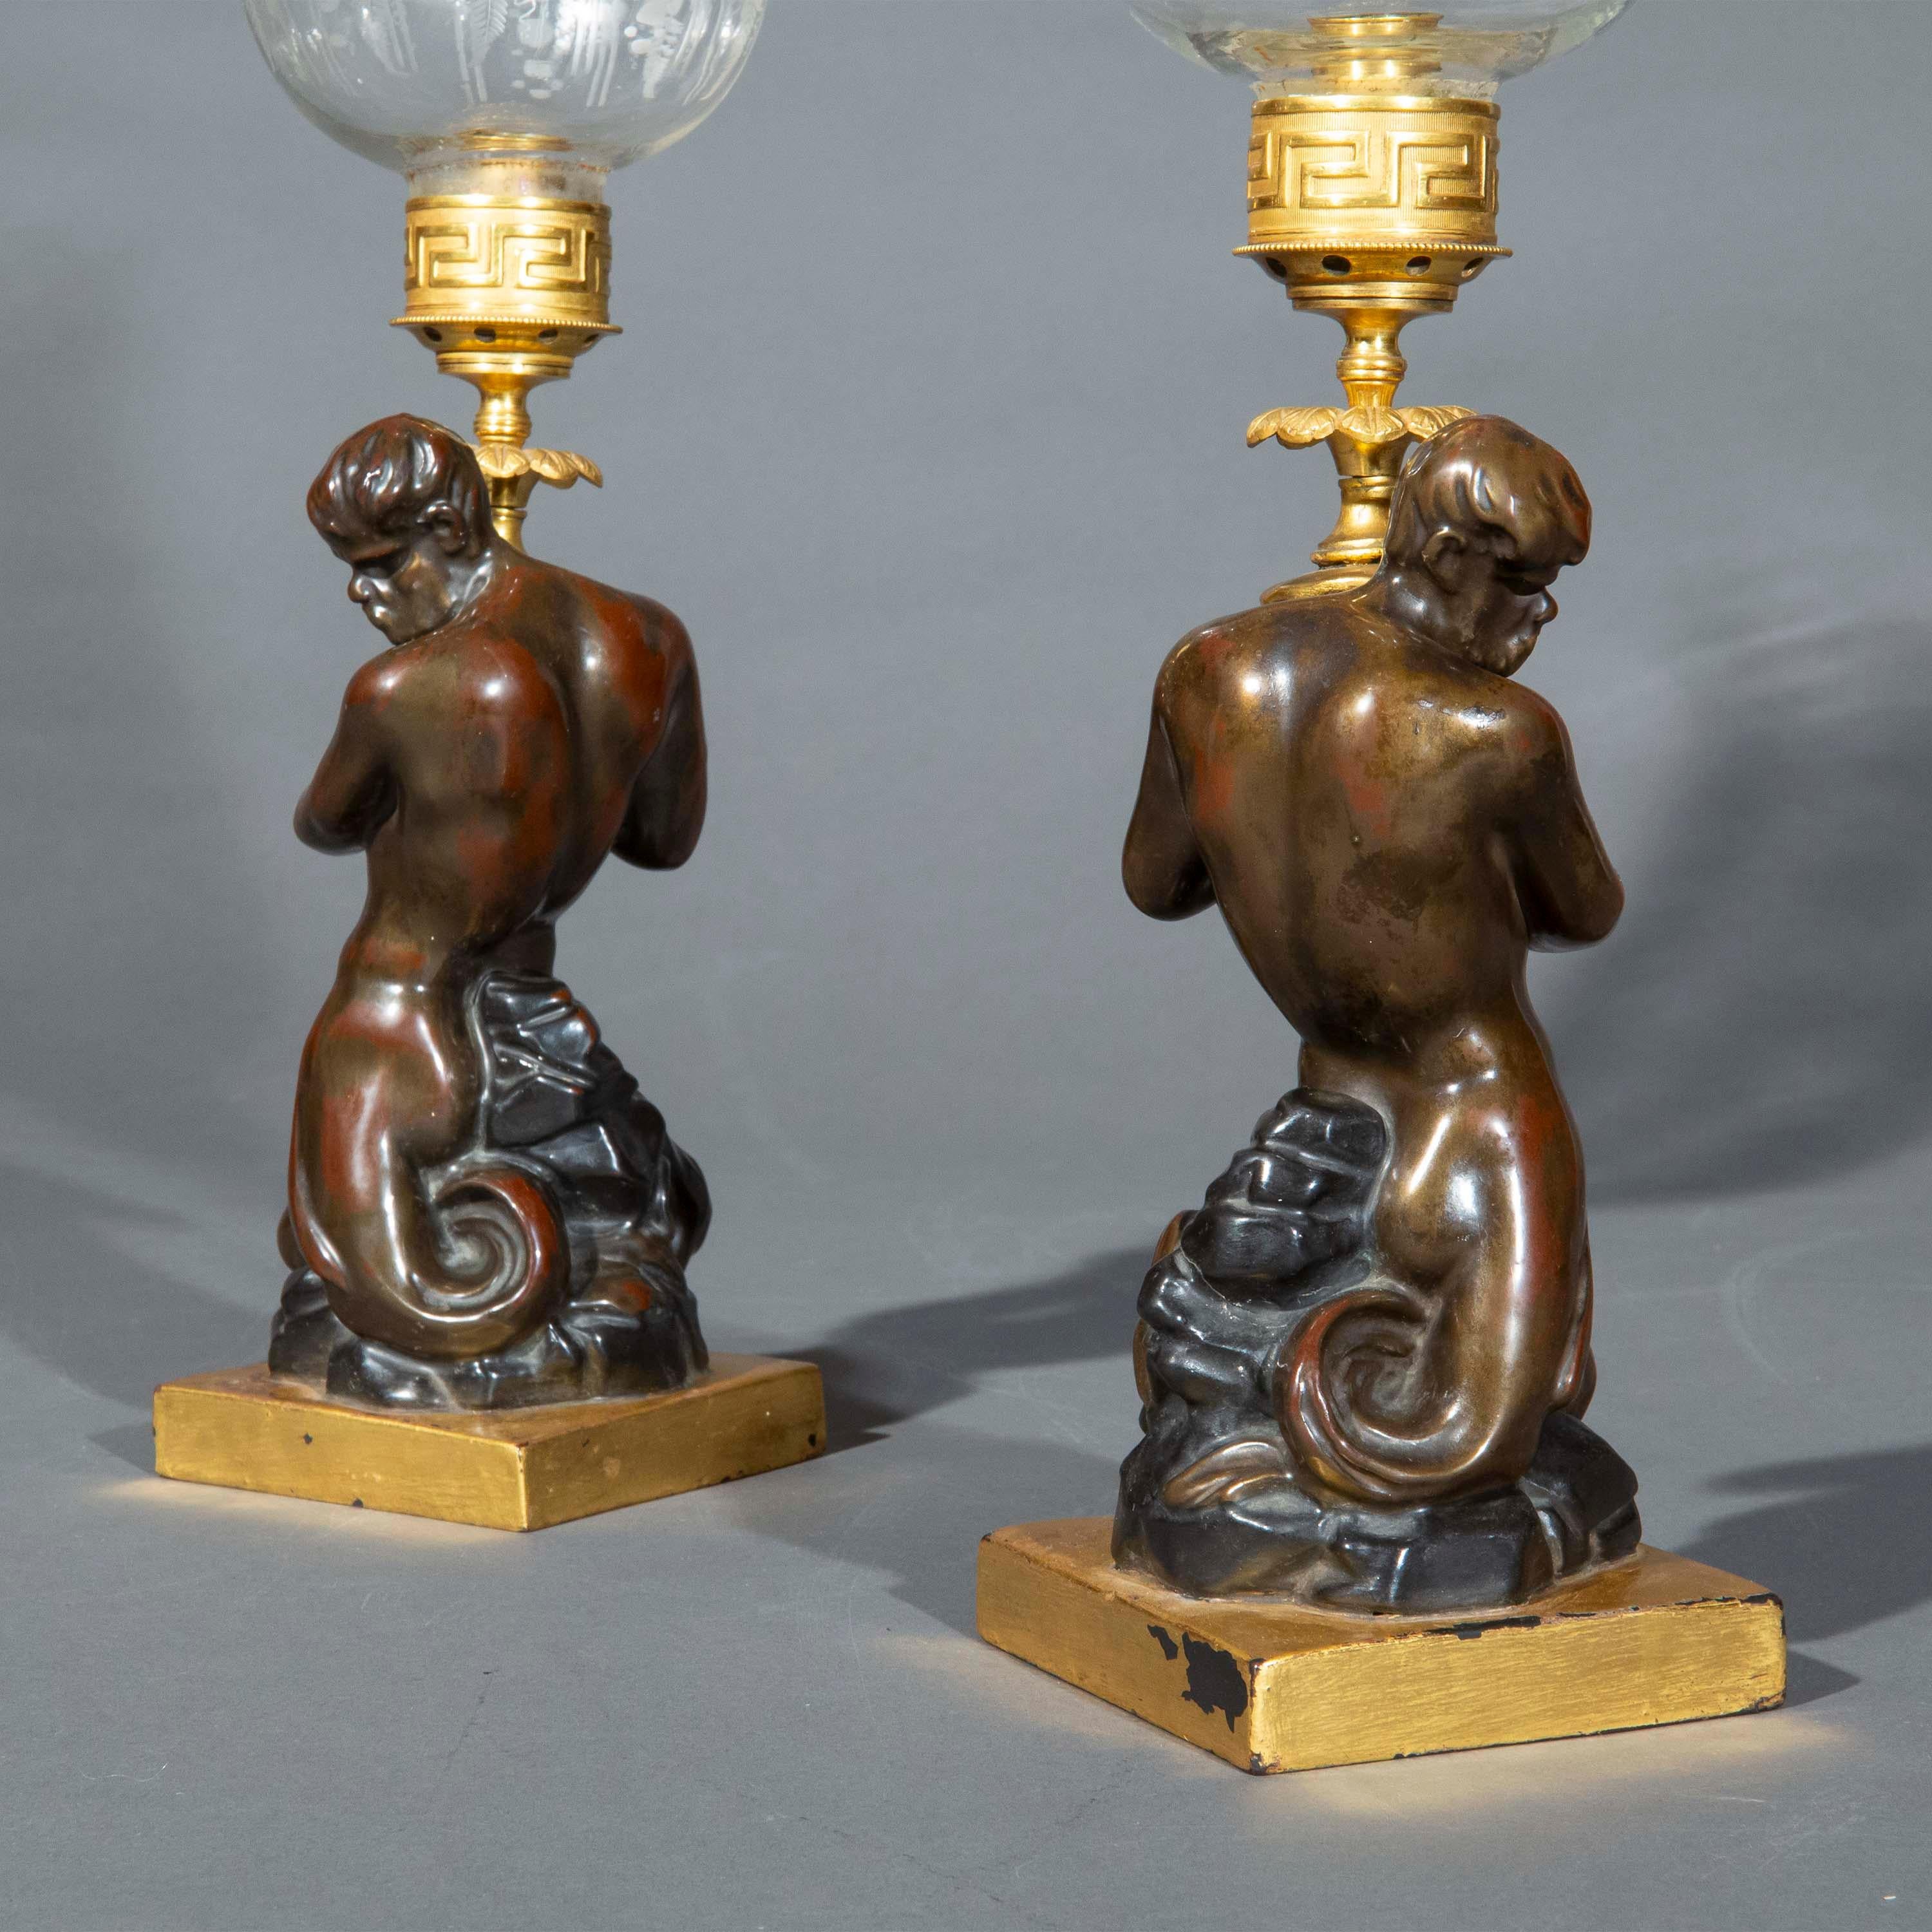 Pair of Early 19th Century Triton Candlesticks Storm Lanterns by Wood & Caldwell For Sale 4